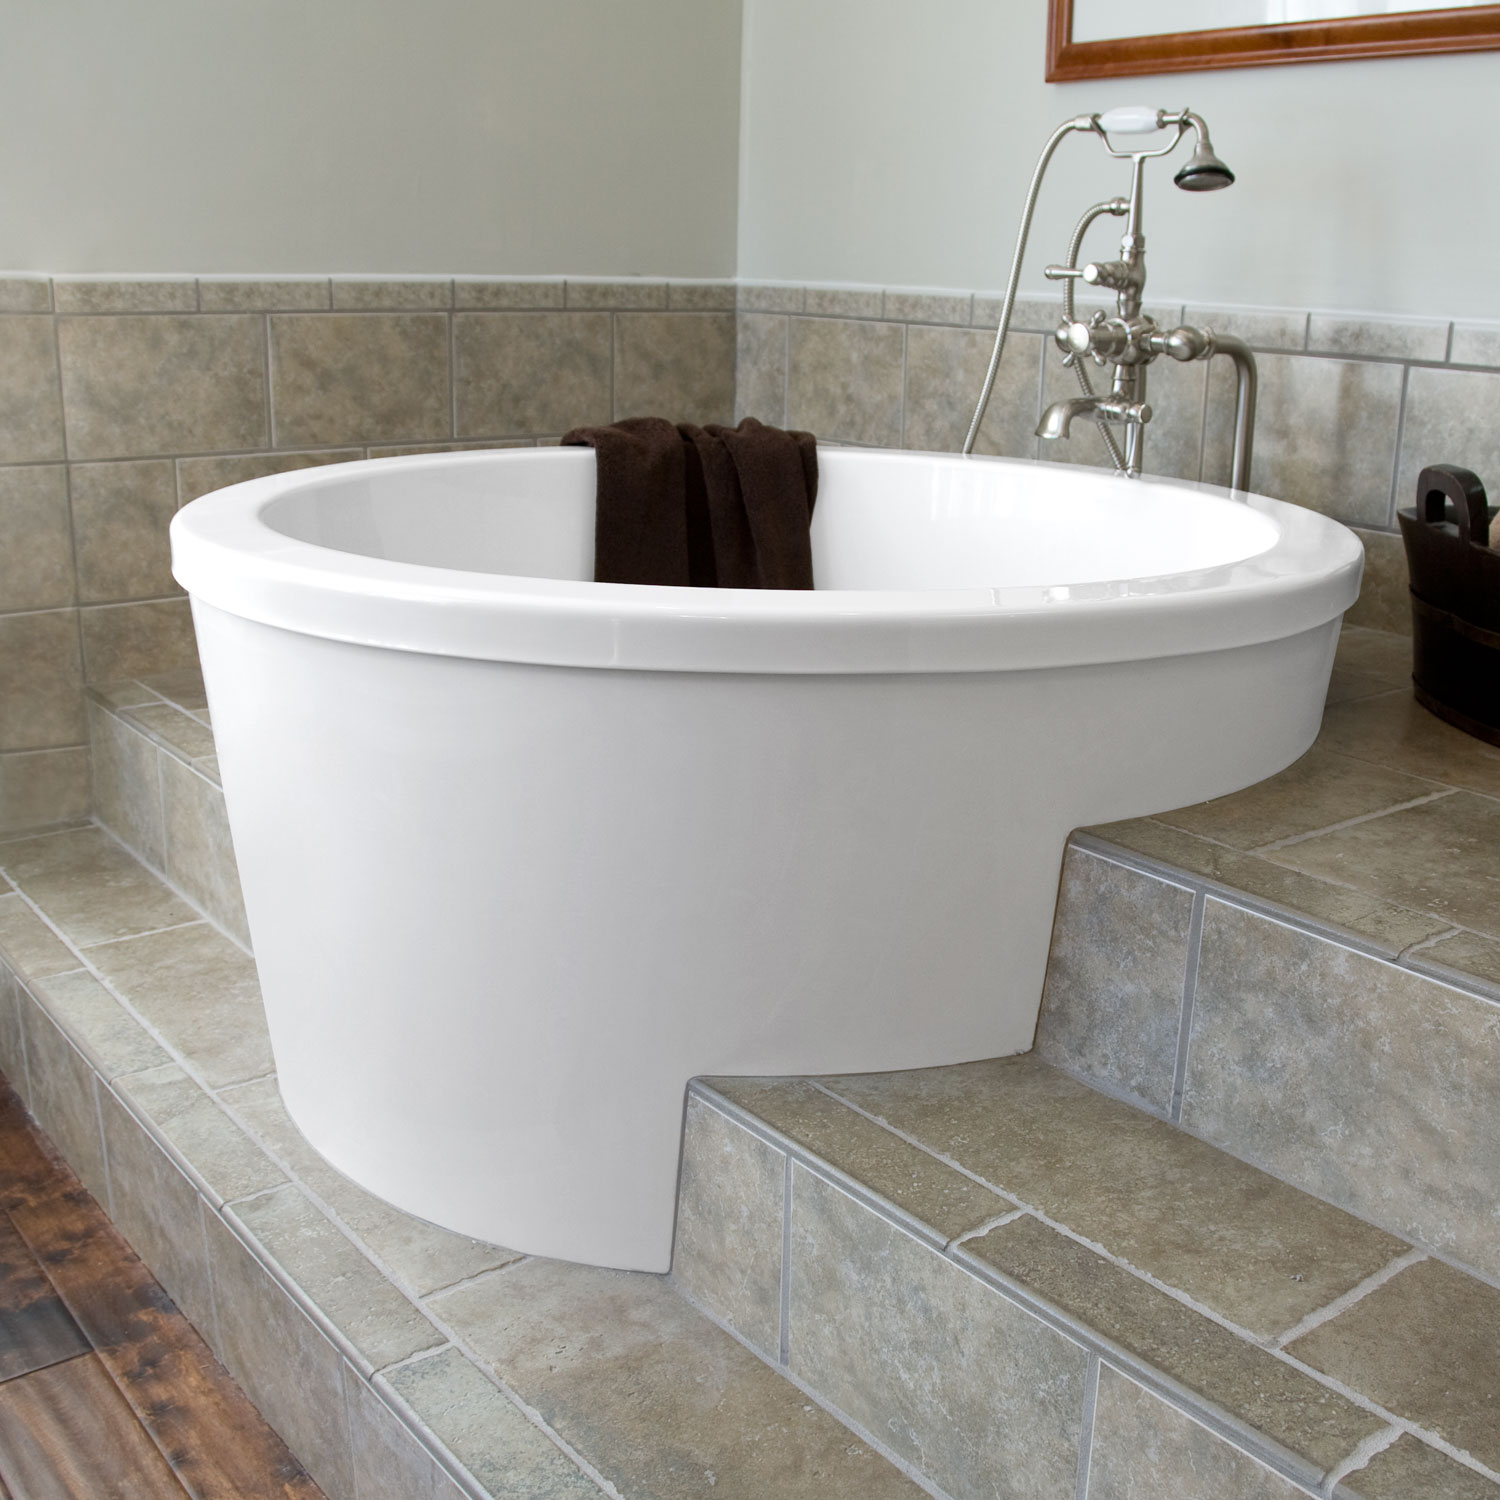 20-small-space-freestanding-tub-in-small-bathroom